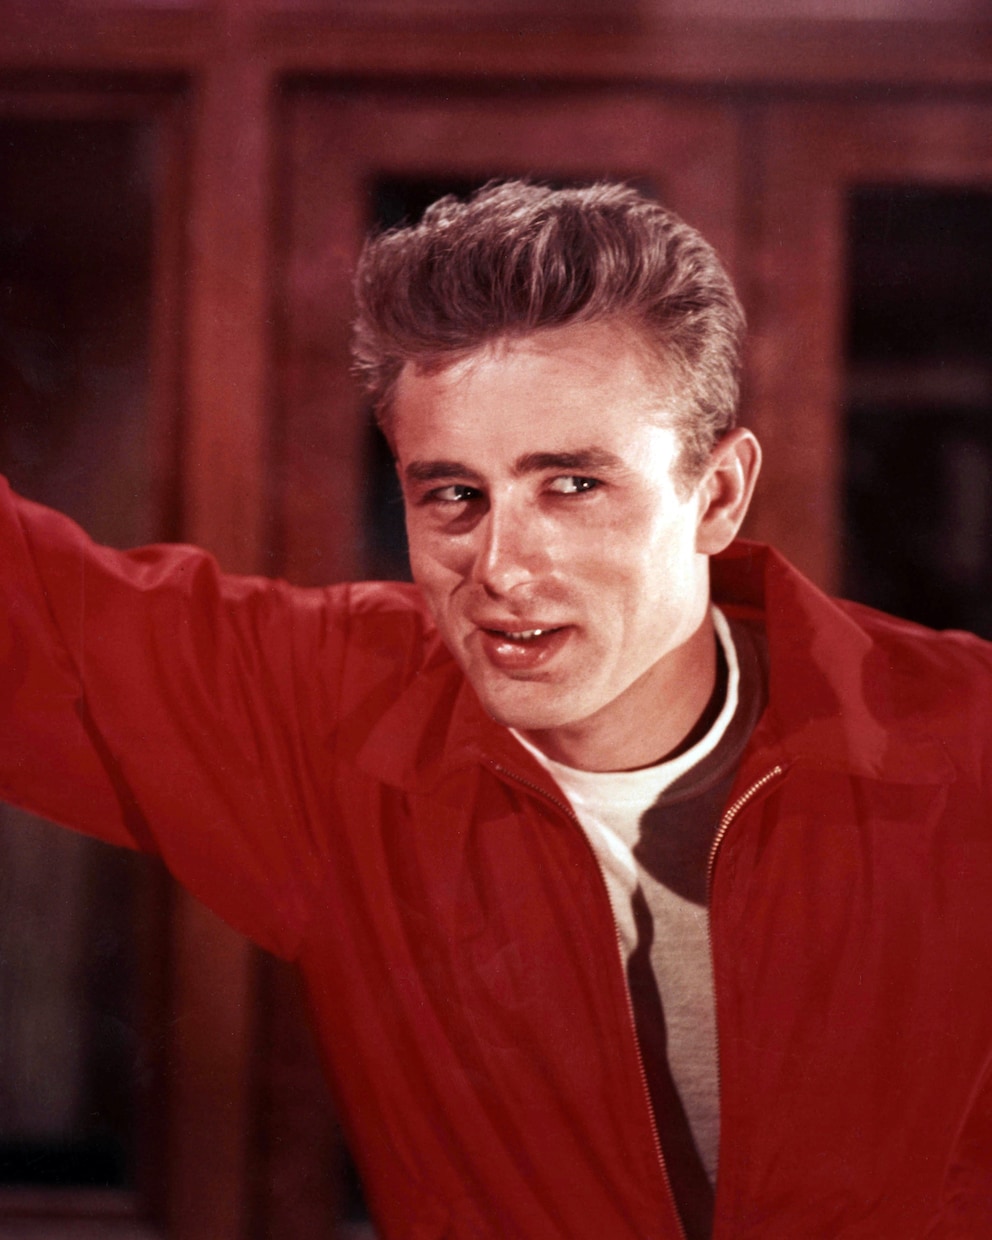 James Dean in his role as difficult teen Jim Stark in 1955.